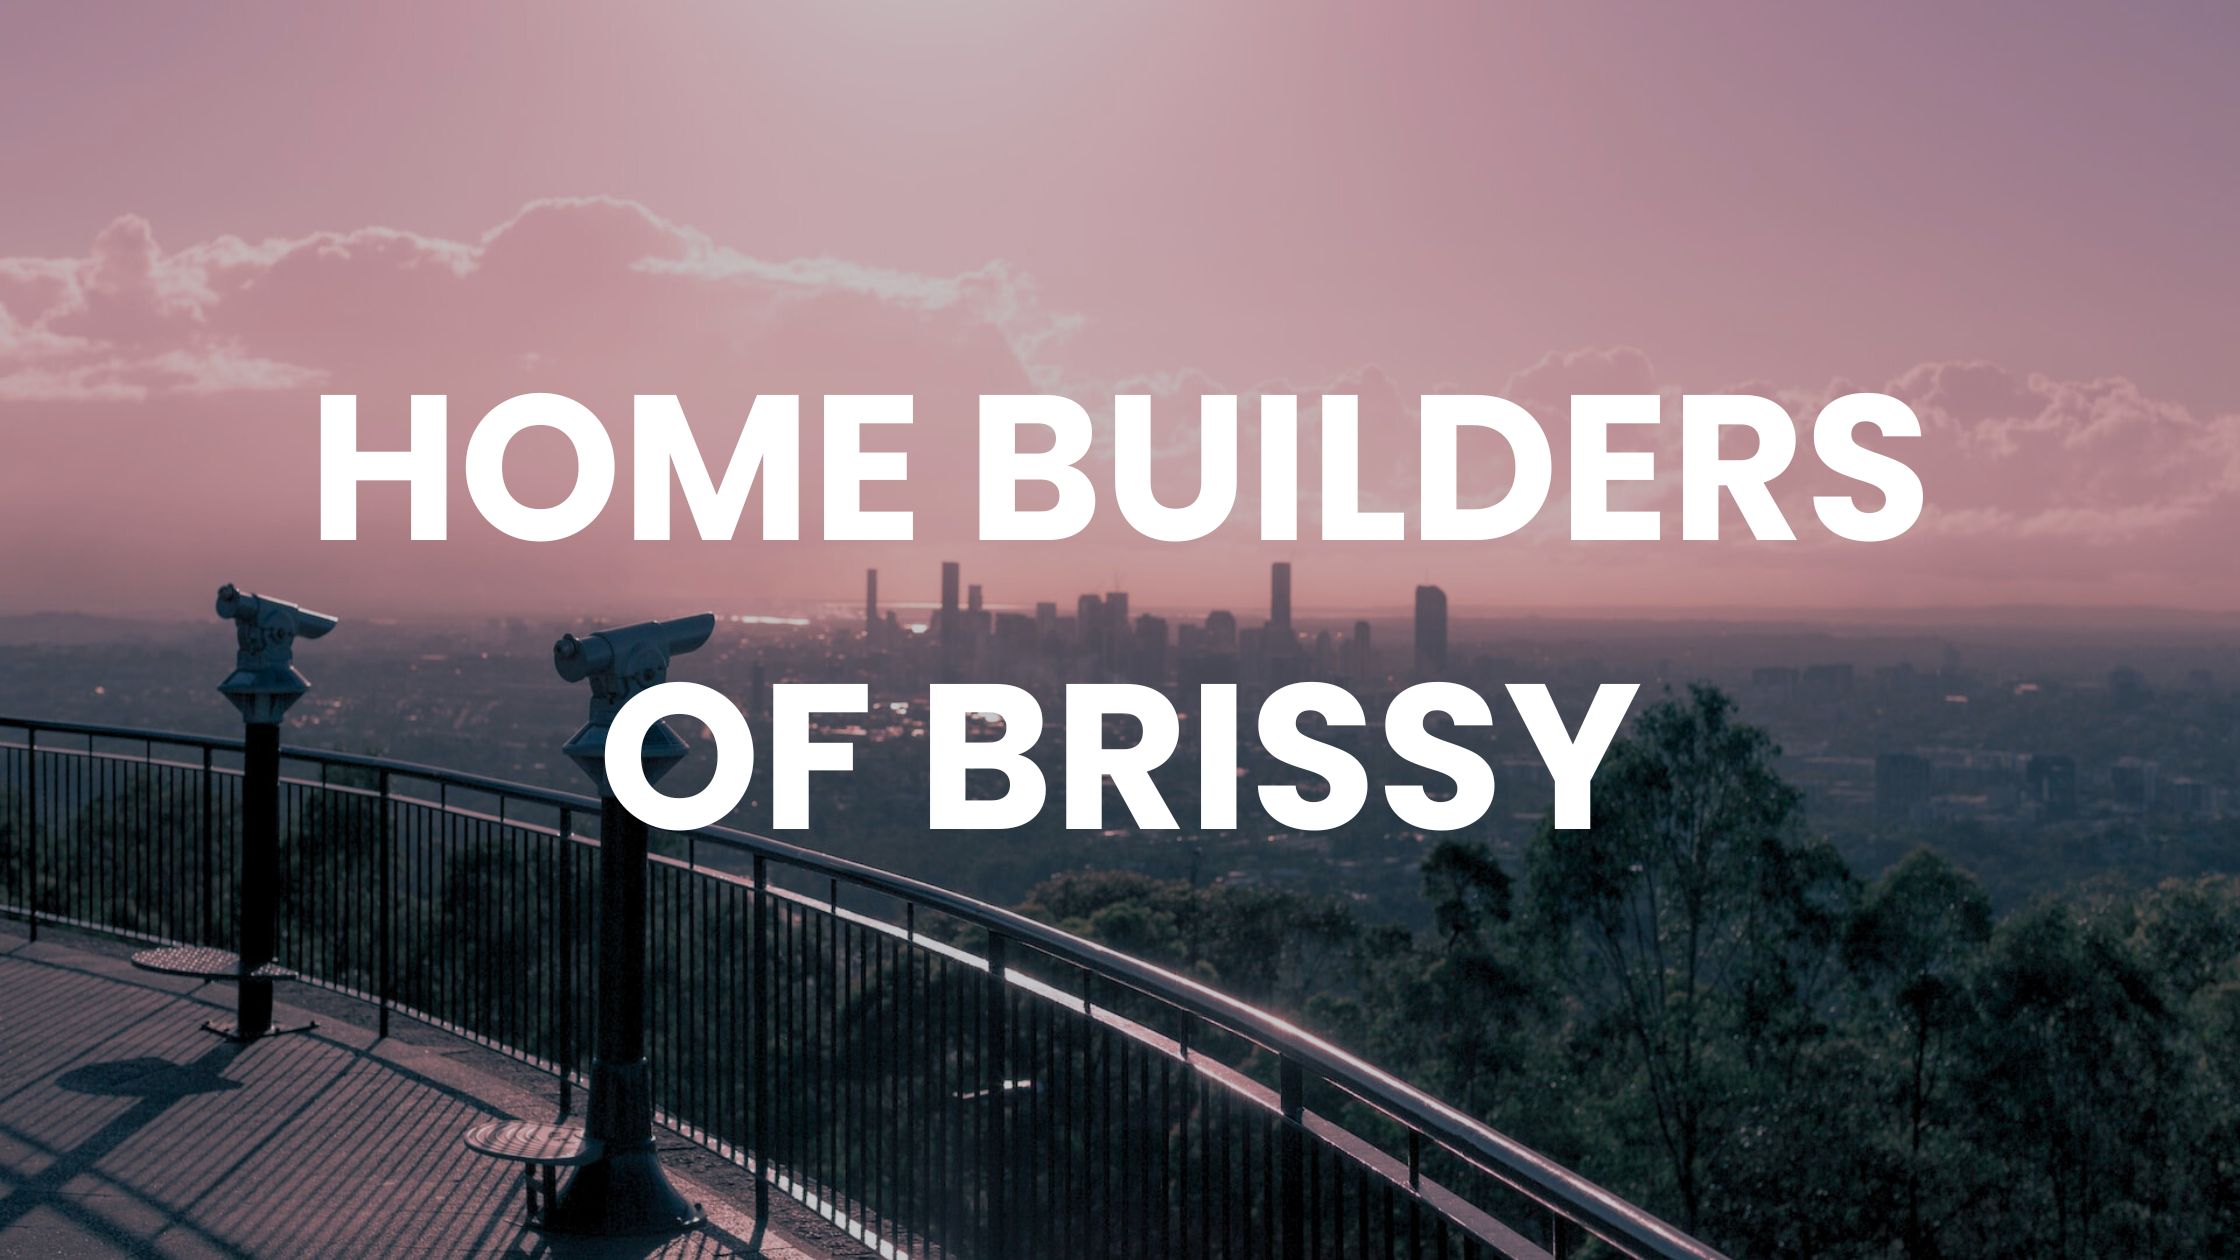 View from Mt Cootha overlooking Brisbane City, text "HOME BUILDERS OF BRISSY"